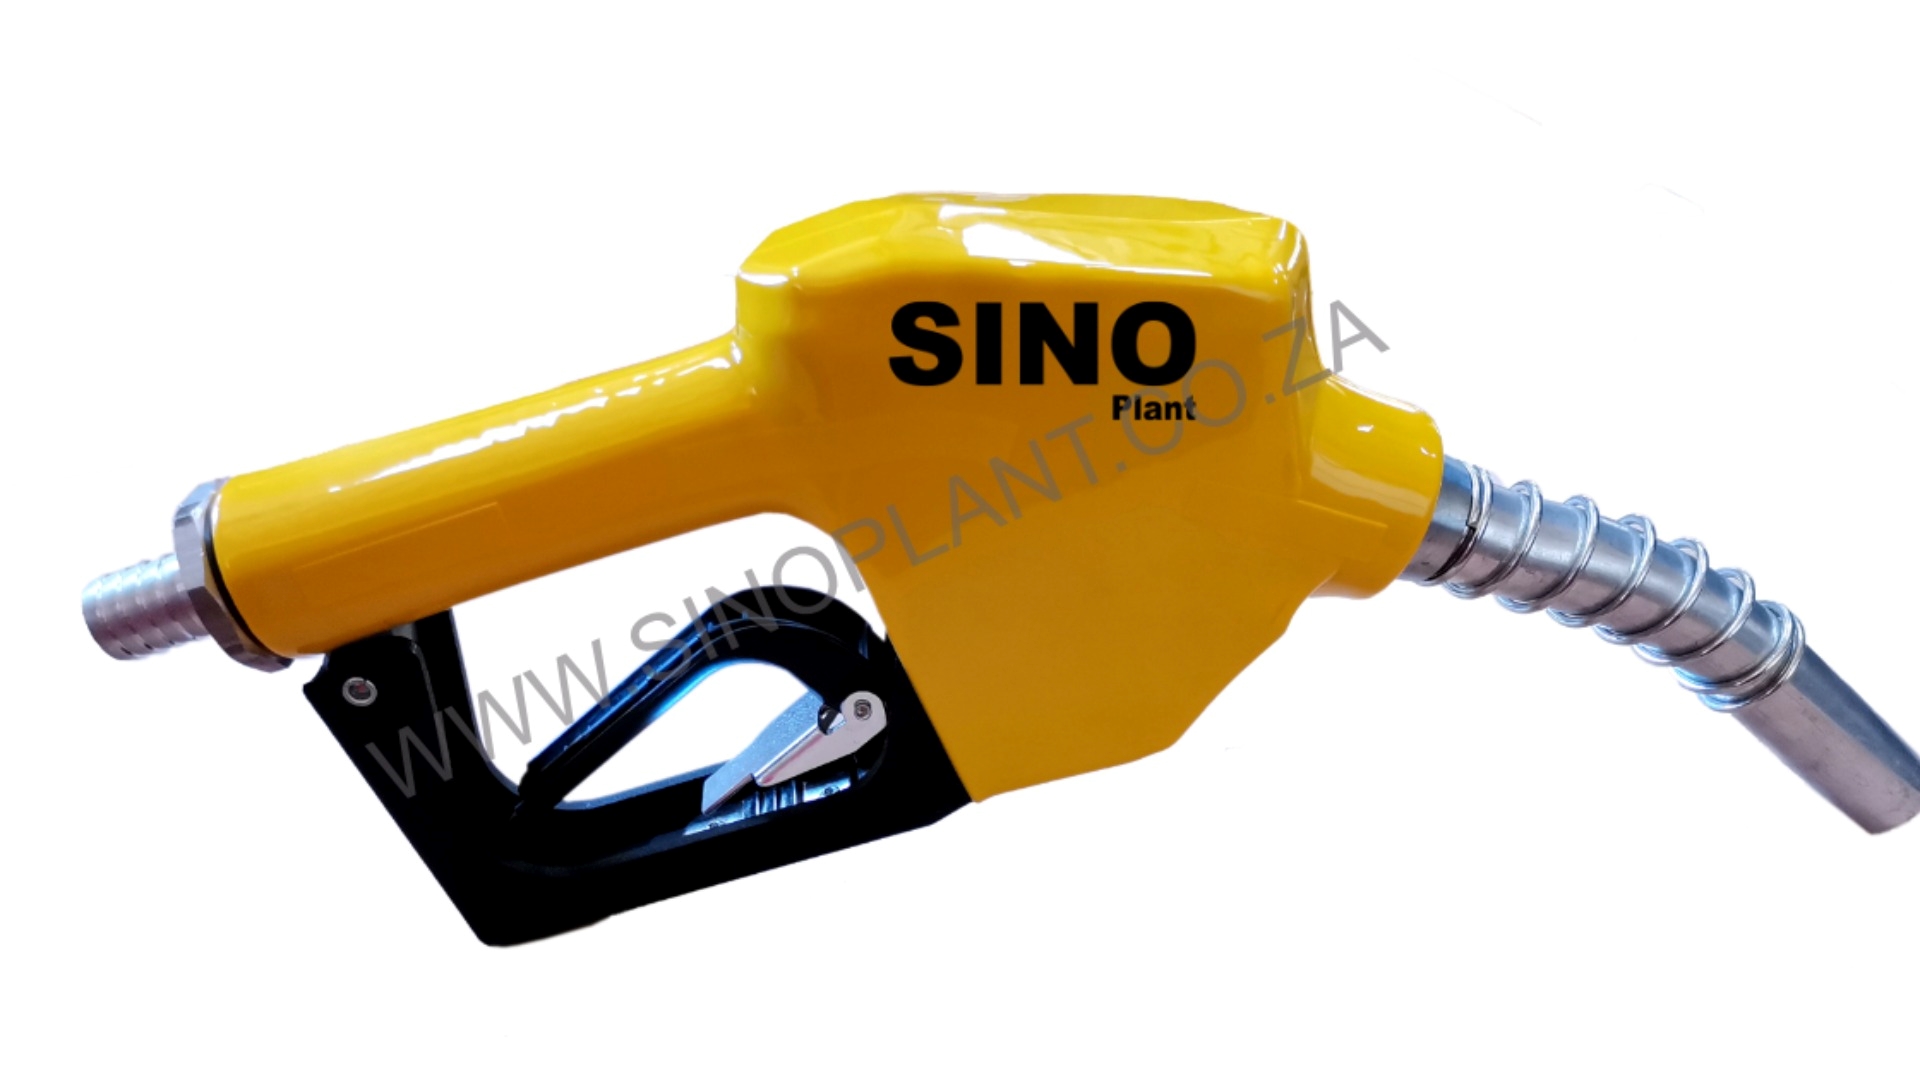 Sino Plant Fuel pumps Fuel Nozzle – Auto Stop   3/4 Inch / 19mm 2022 for sale by Sino Plant | Truck & Trailer Marketplaces